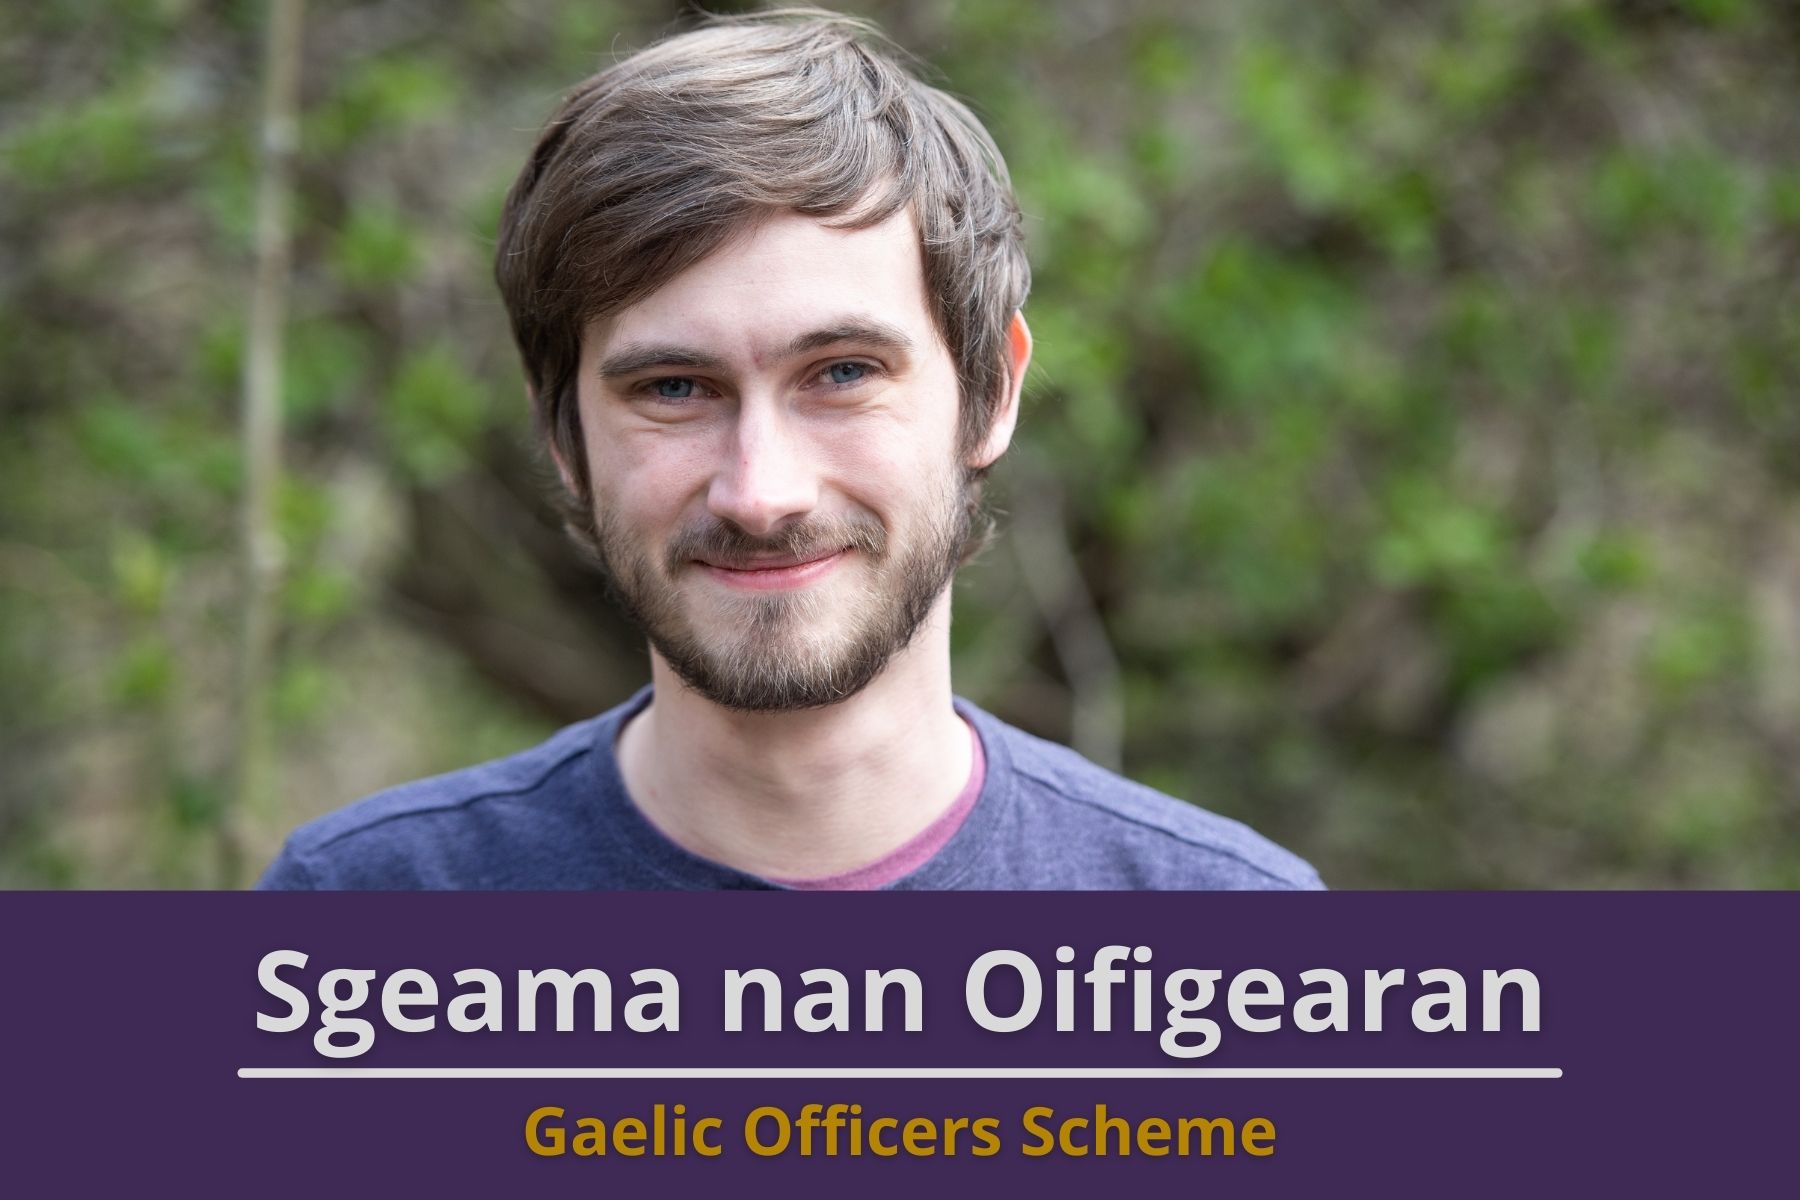 Bòrd na Gàidhlig provides almost £1 million for Gaelic Development Officers